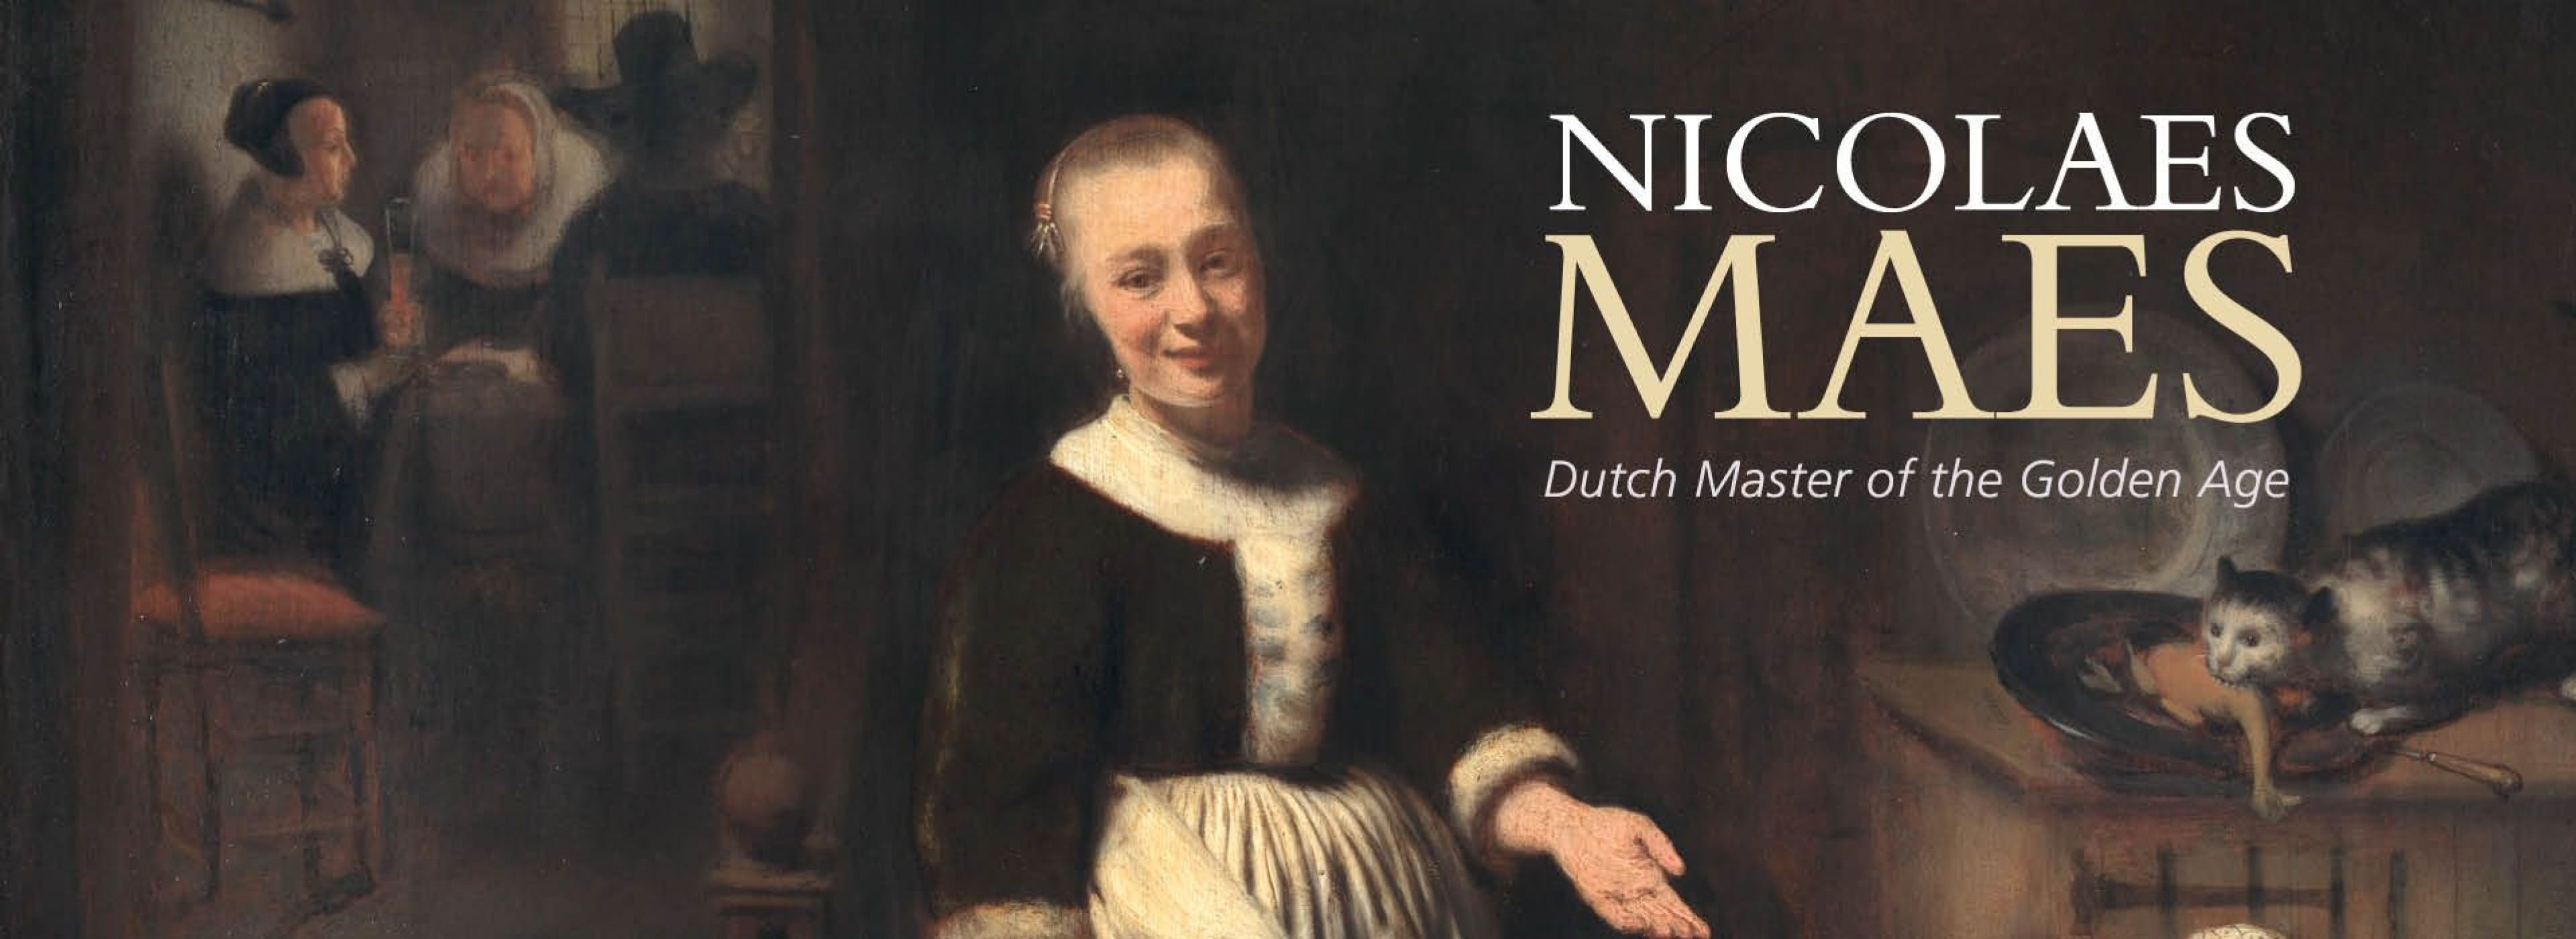 Nicolaes Maes Dutch Master of the Golden Age